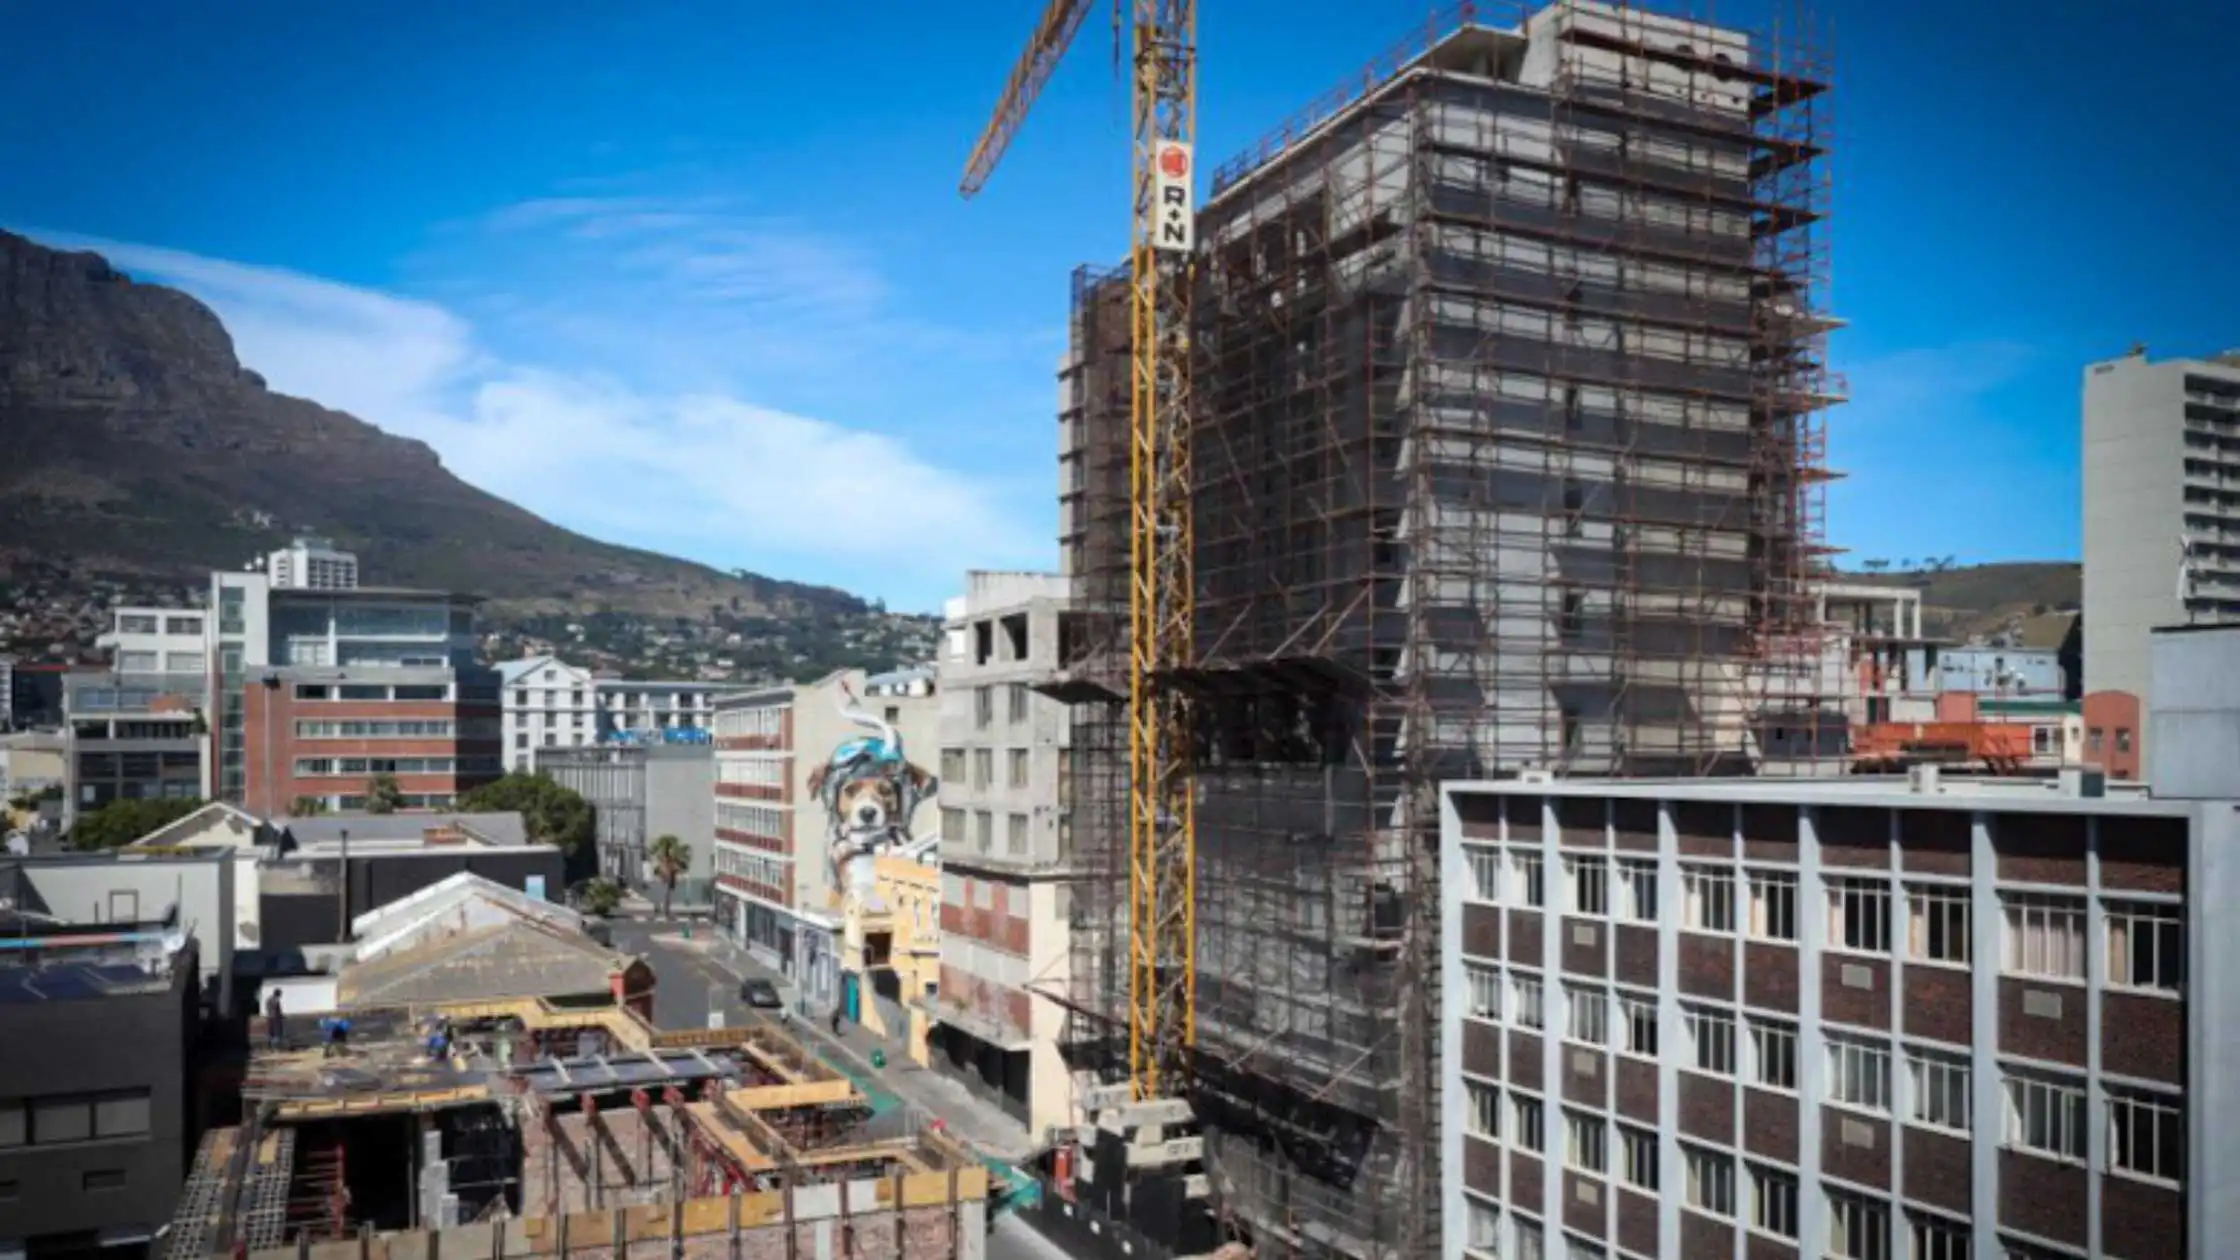 South African Venture Demonstrates Hemps Ability to Upgrade Present Buildings